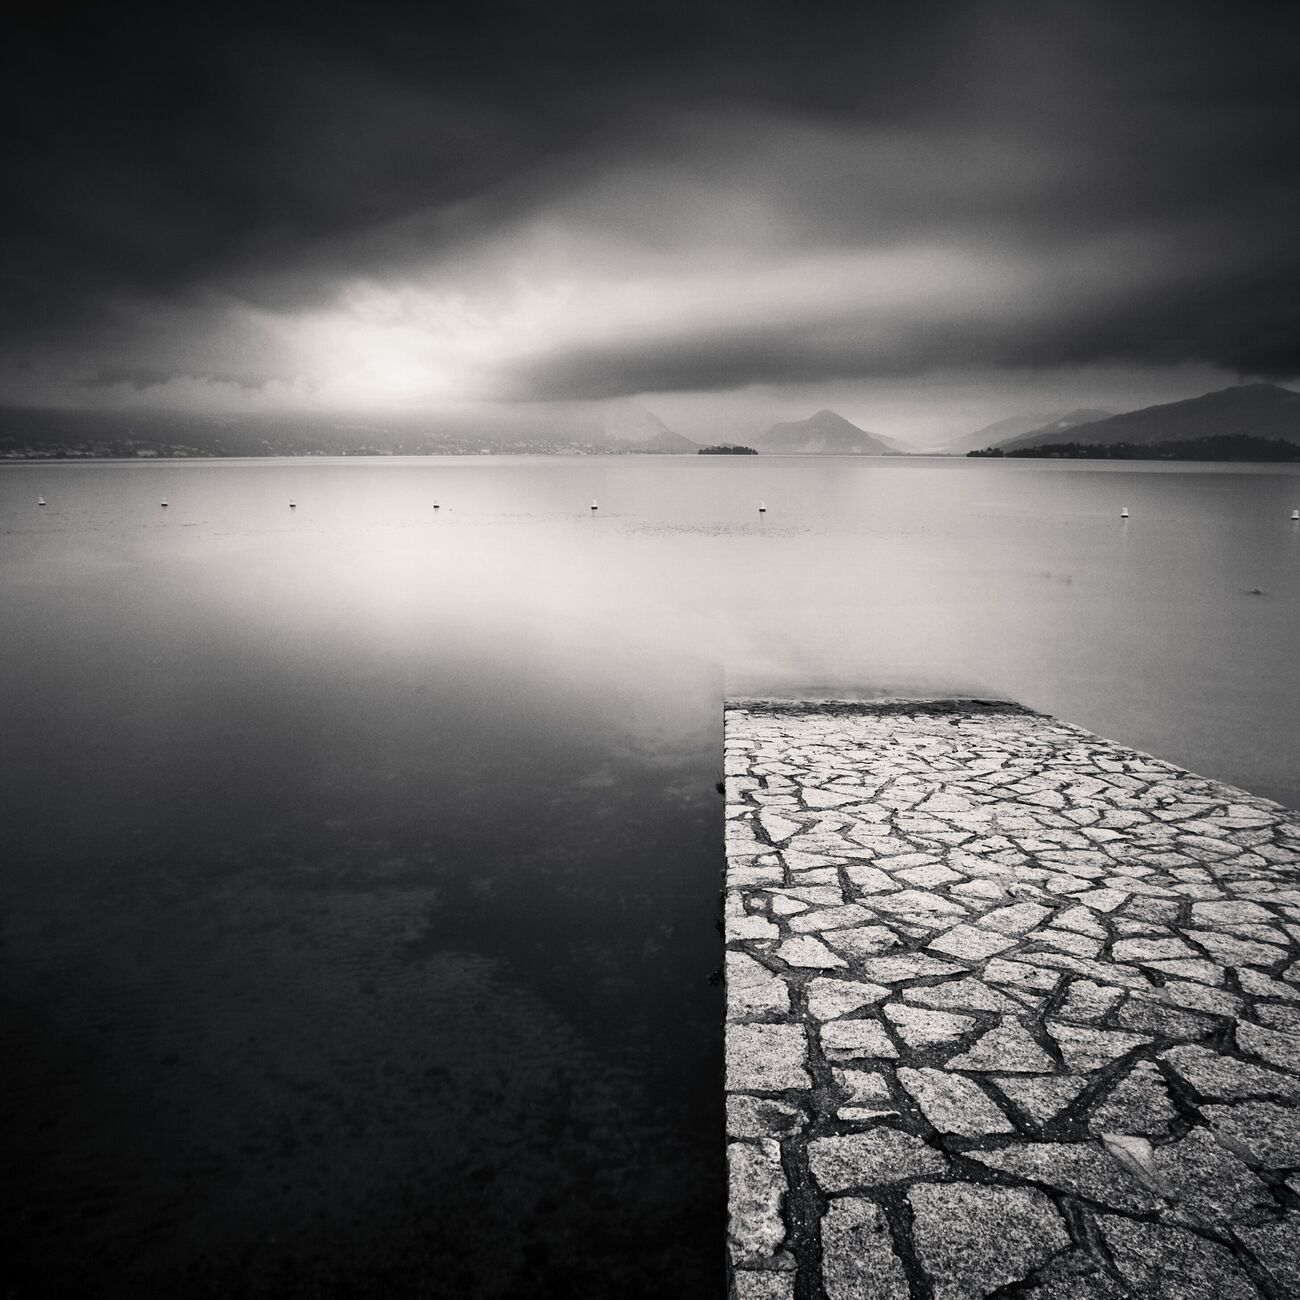 Paved Ramp, Etude 1, Lake Maggiore, Italy. August 2014. Ref-1302 - Denis Olivier Photography